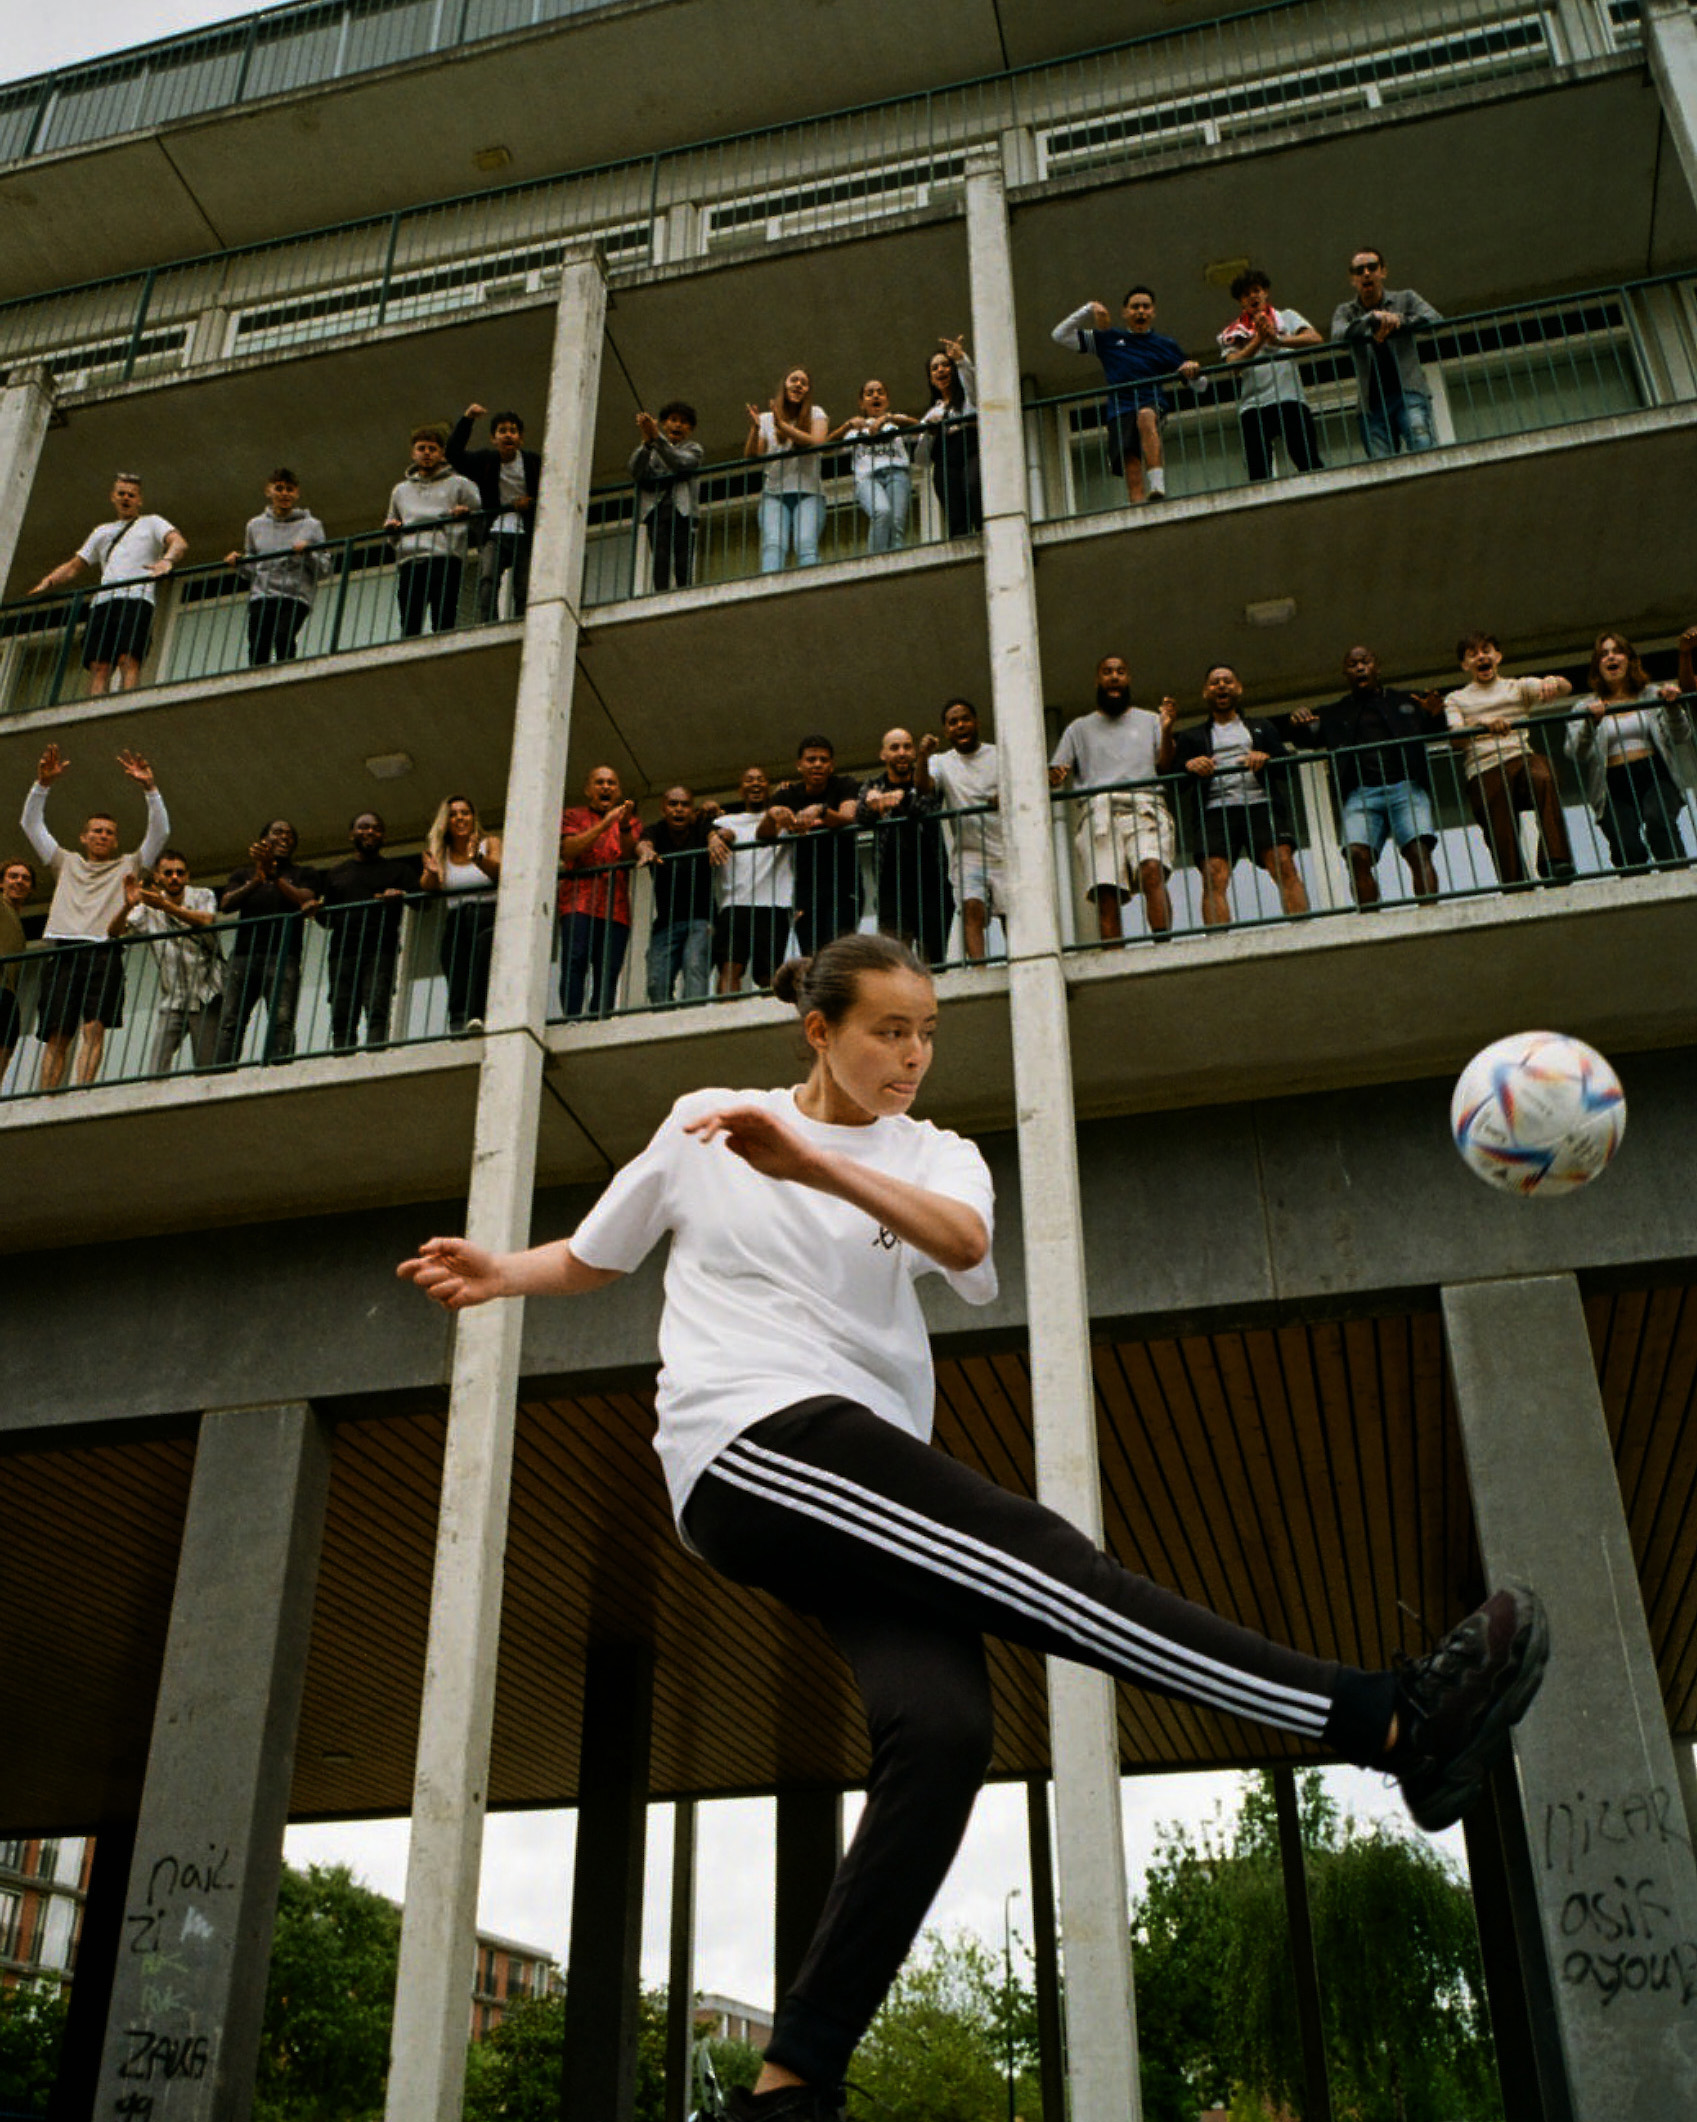 Daily Paper (@dailypaper) Connects With Ajax to Celebrate Amsterdam’s Street Football Generation￼